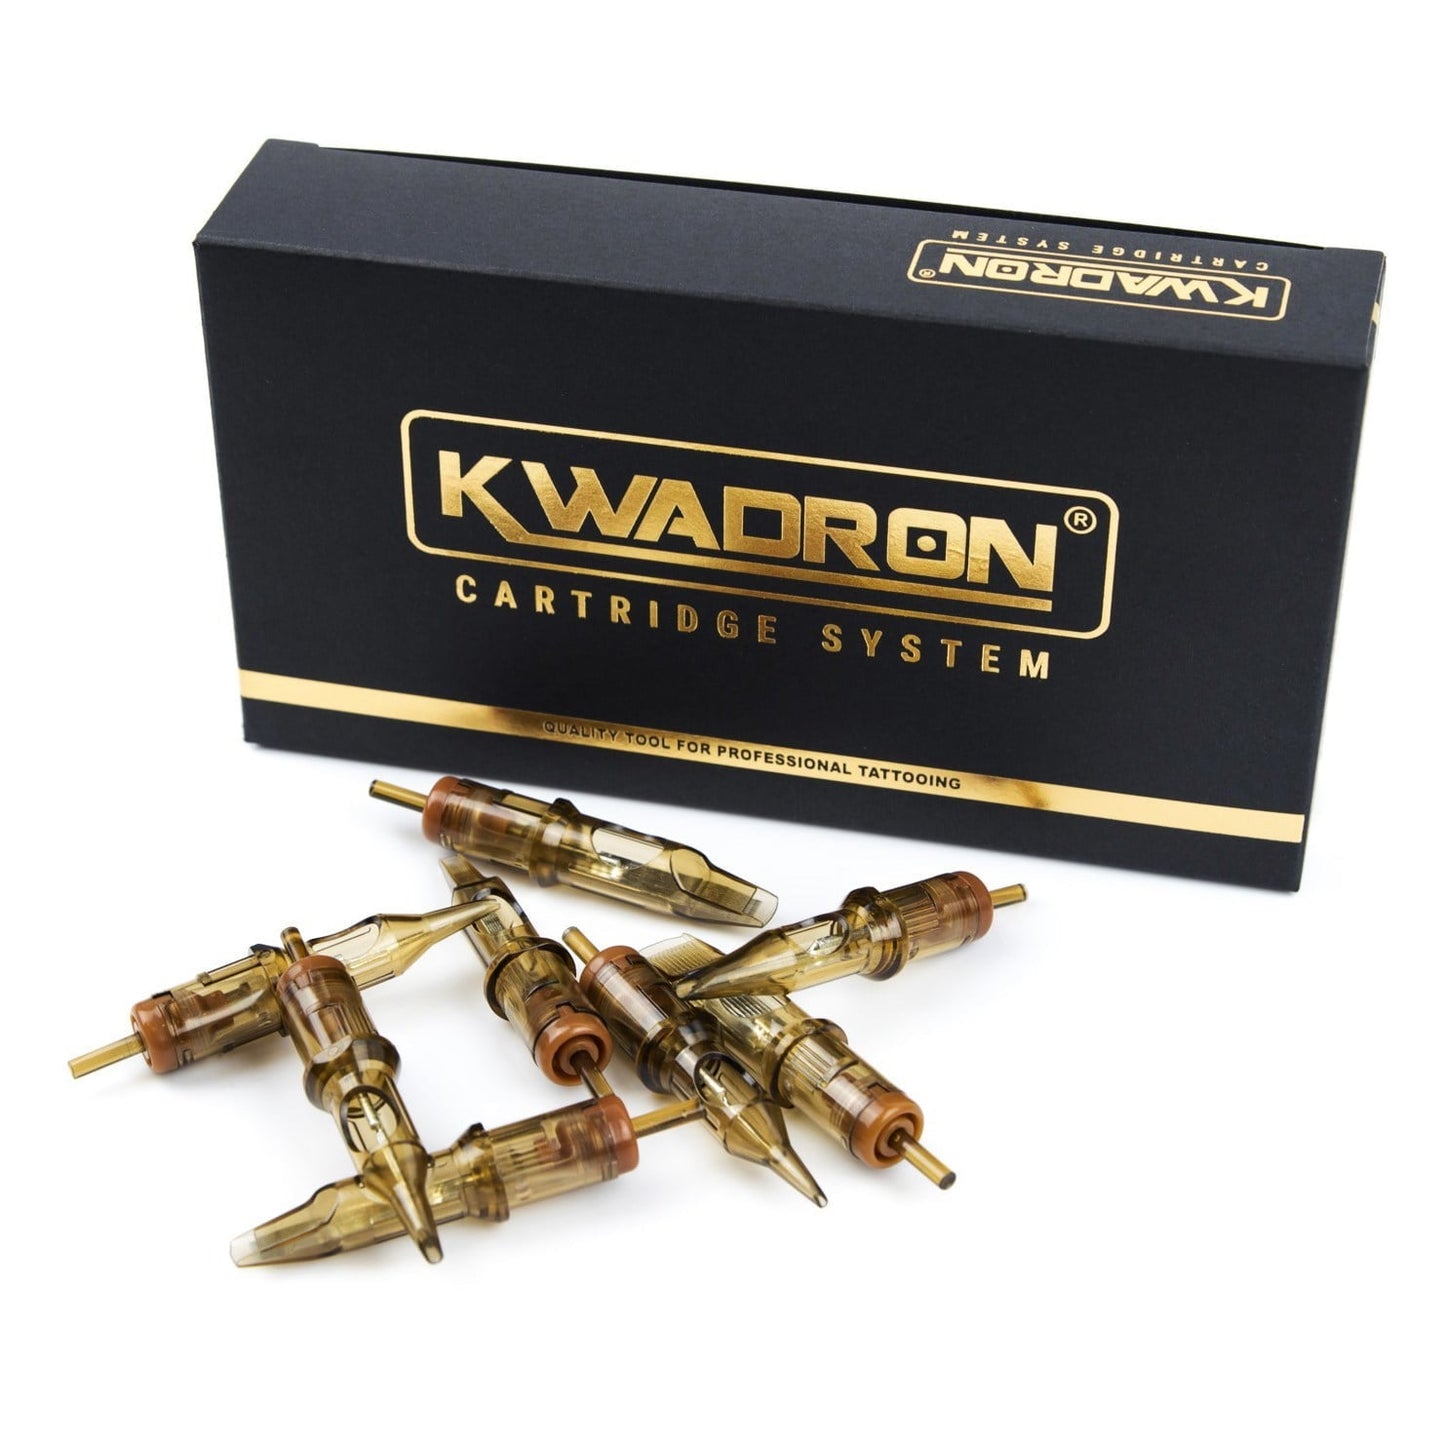 KWADRON Turbo Liners #12 (0.35mm)